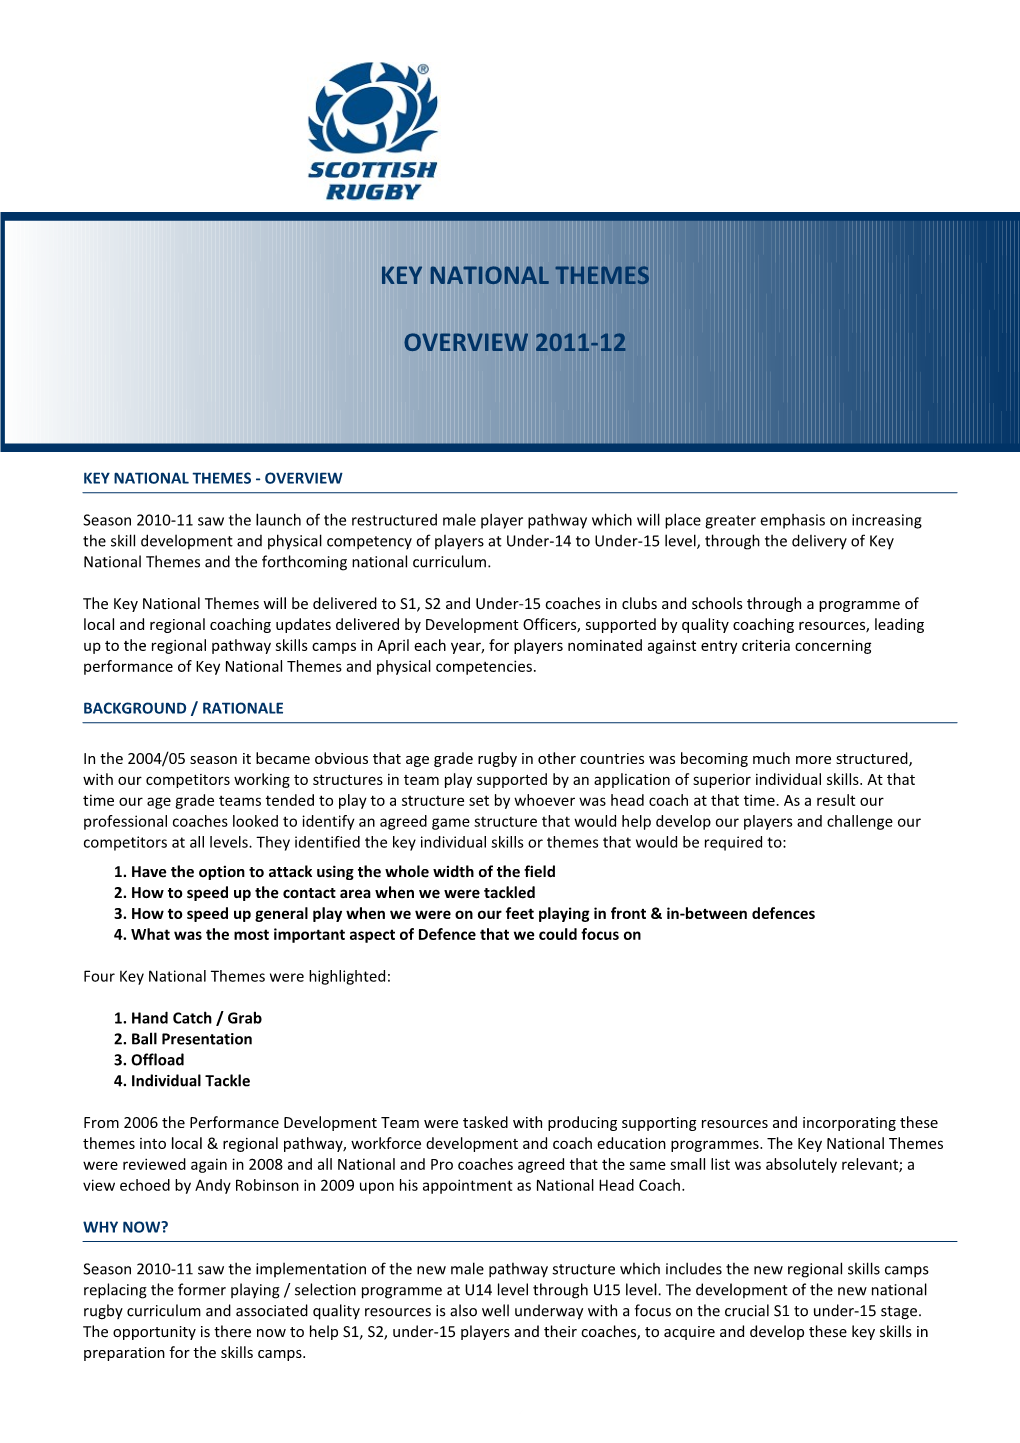 Key National Themes - Overview